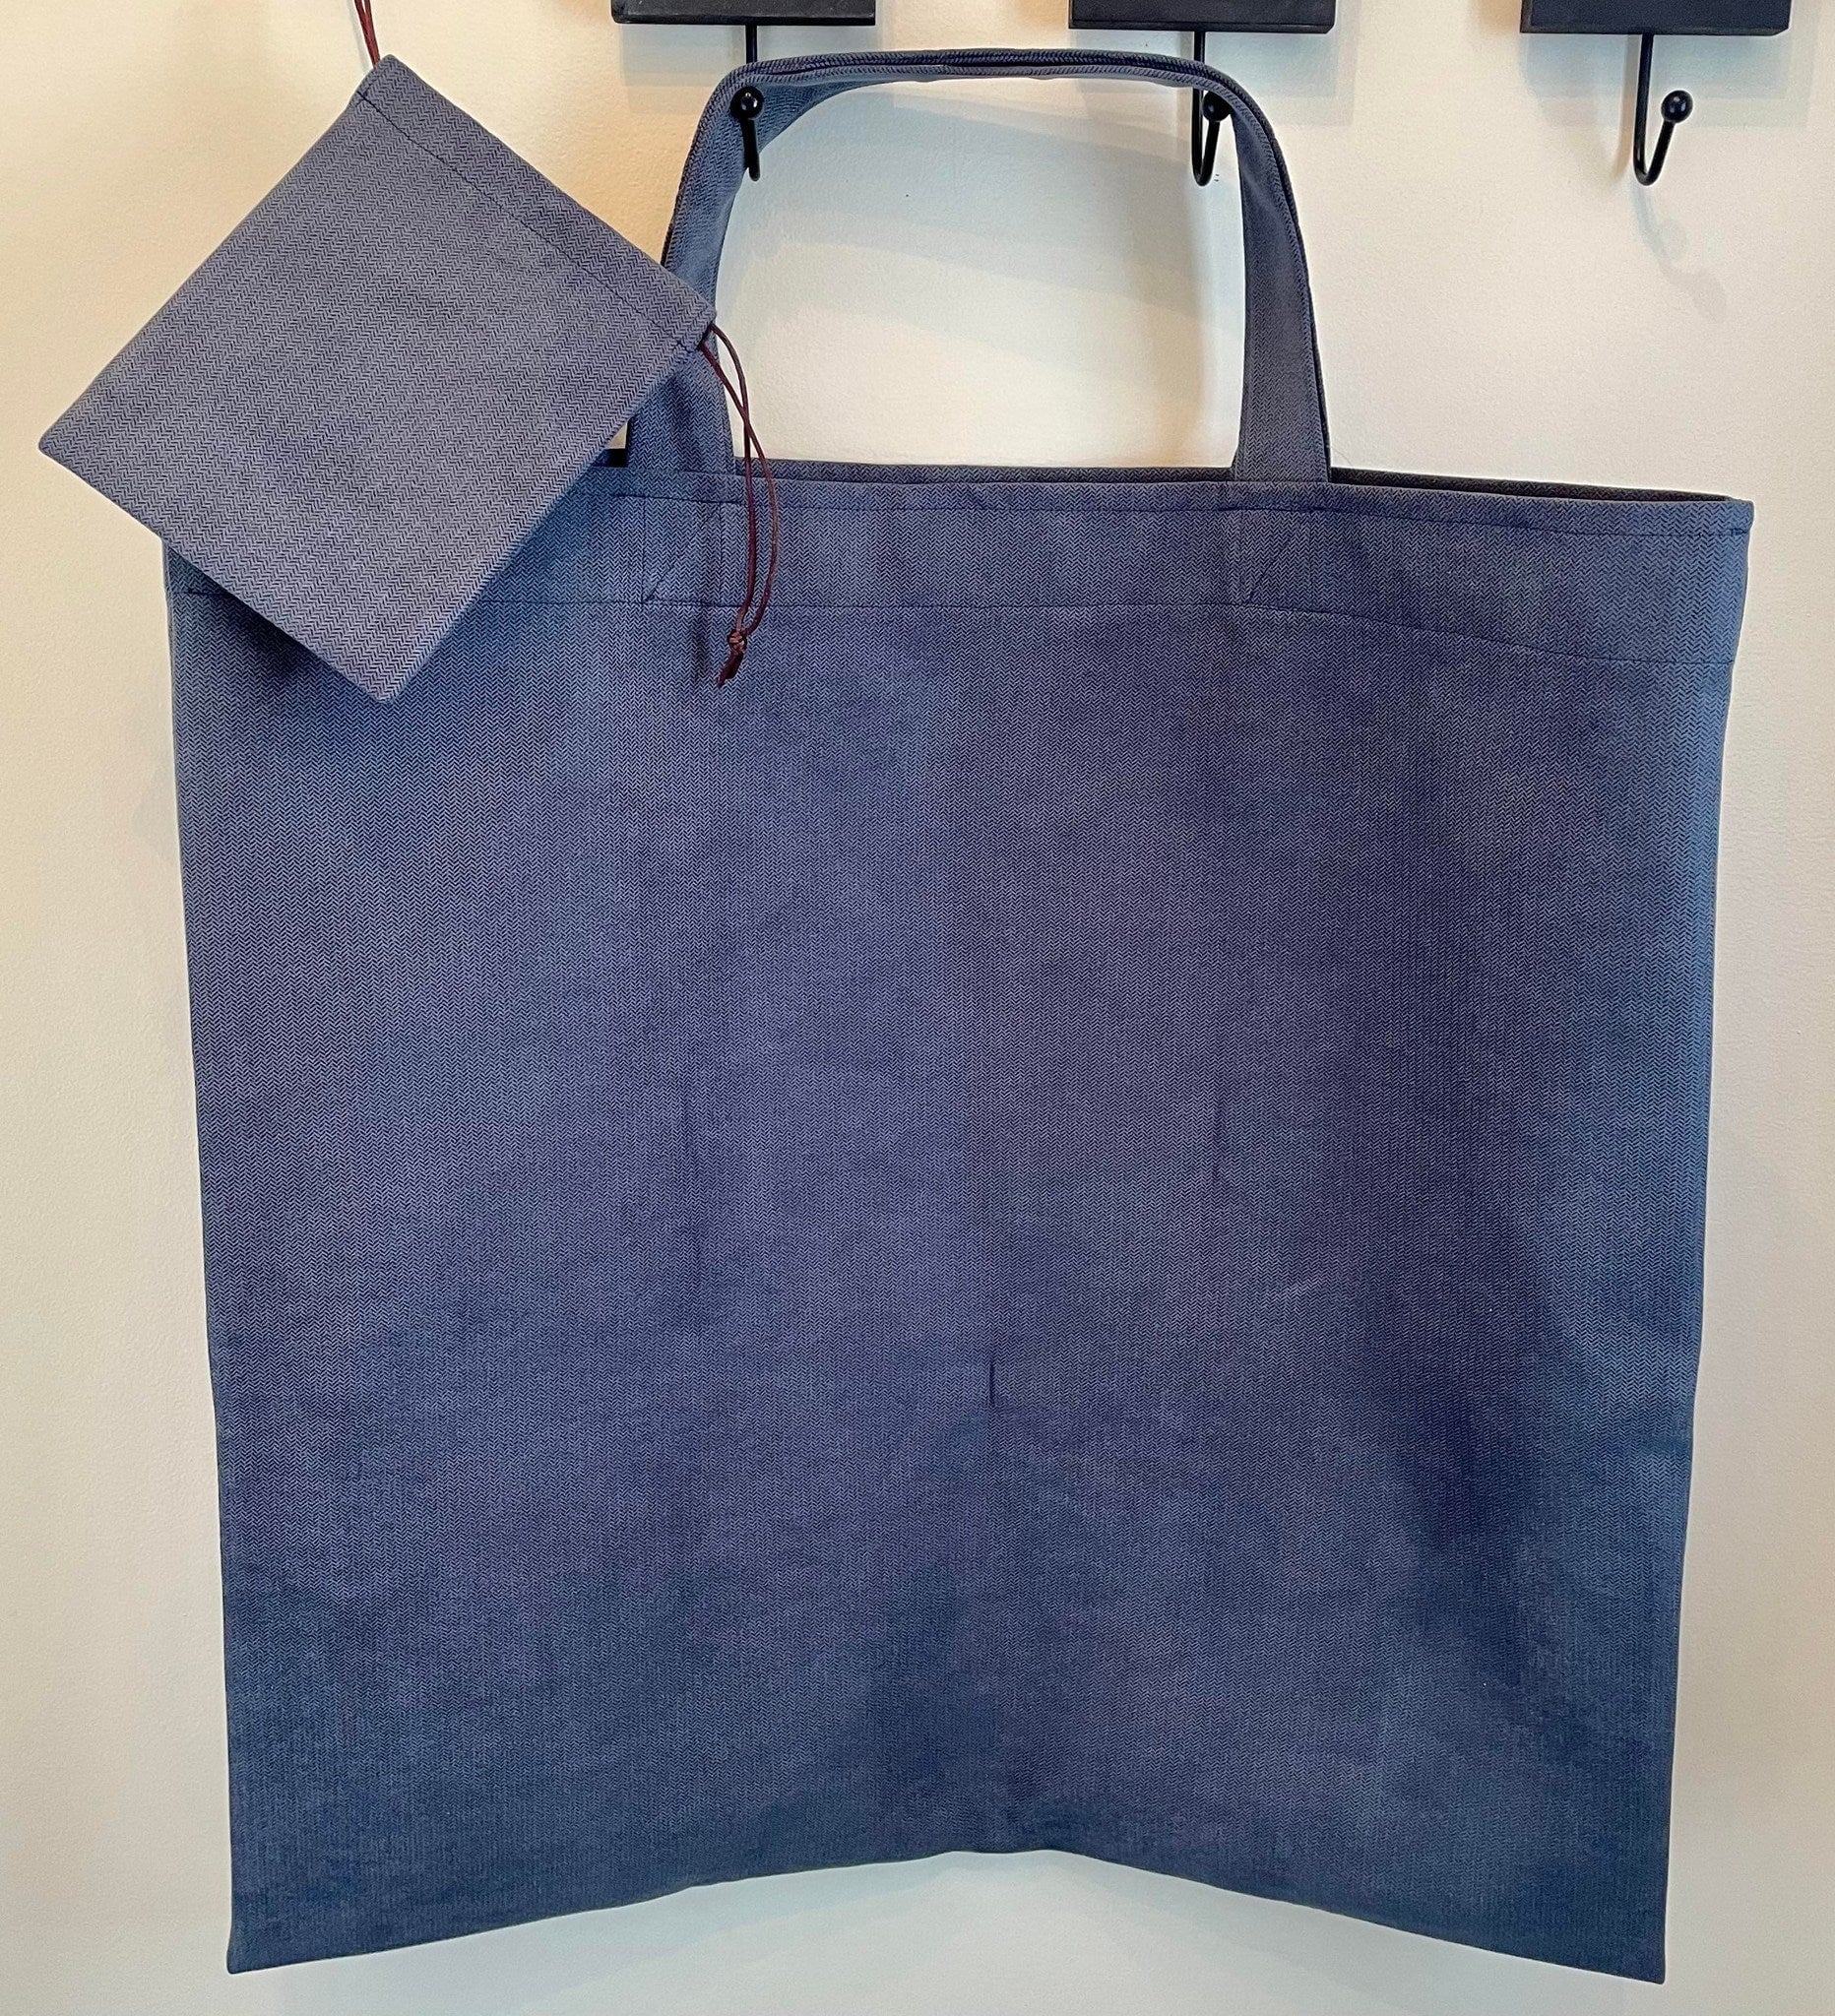 Large Game Tote Set Deep Blue (french blue -not navy - upholstery fabric)